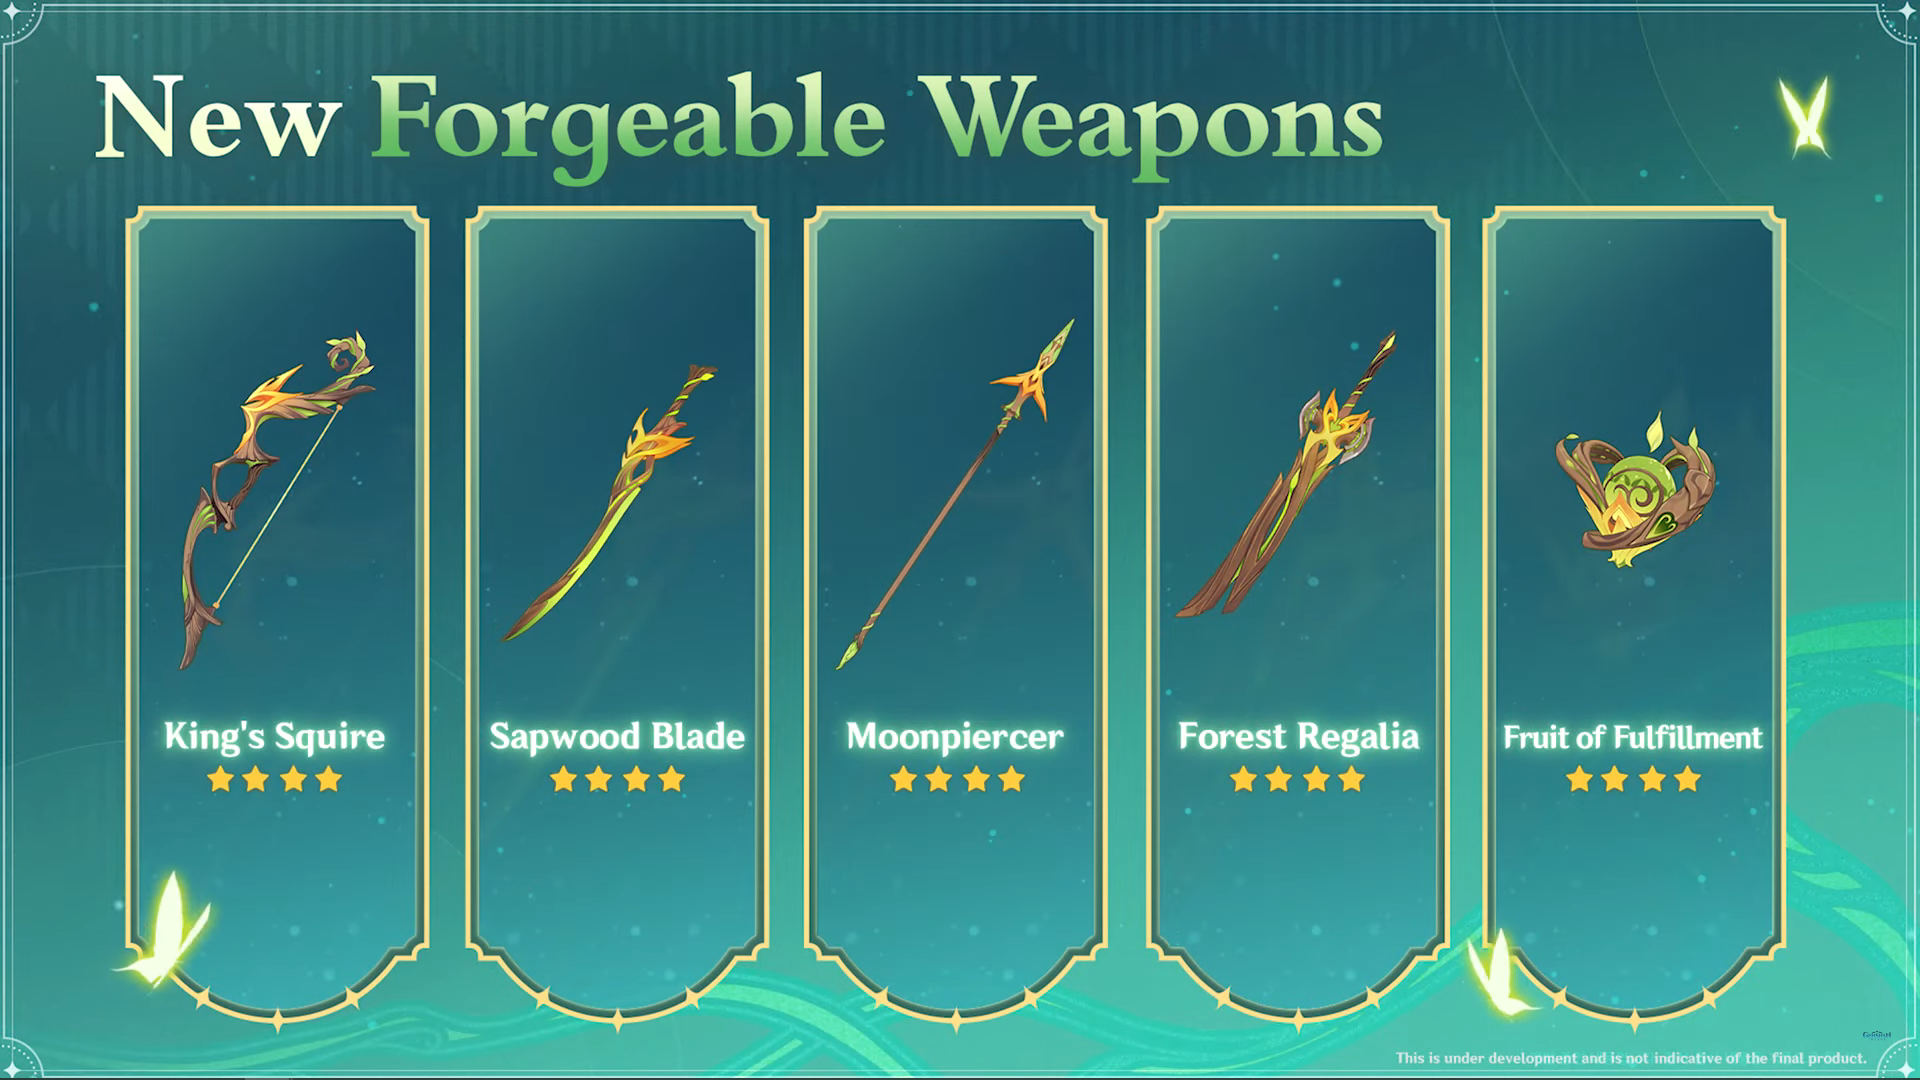 Genshin Impact Version 3.0 New Forgeable Weapons